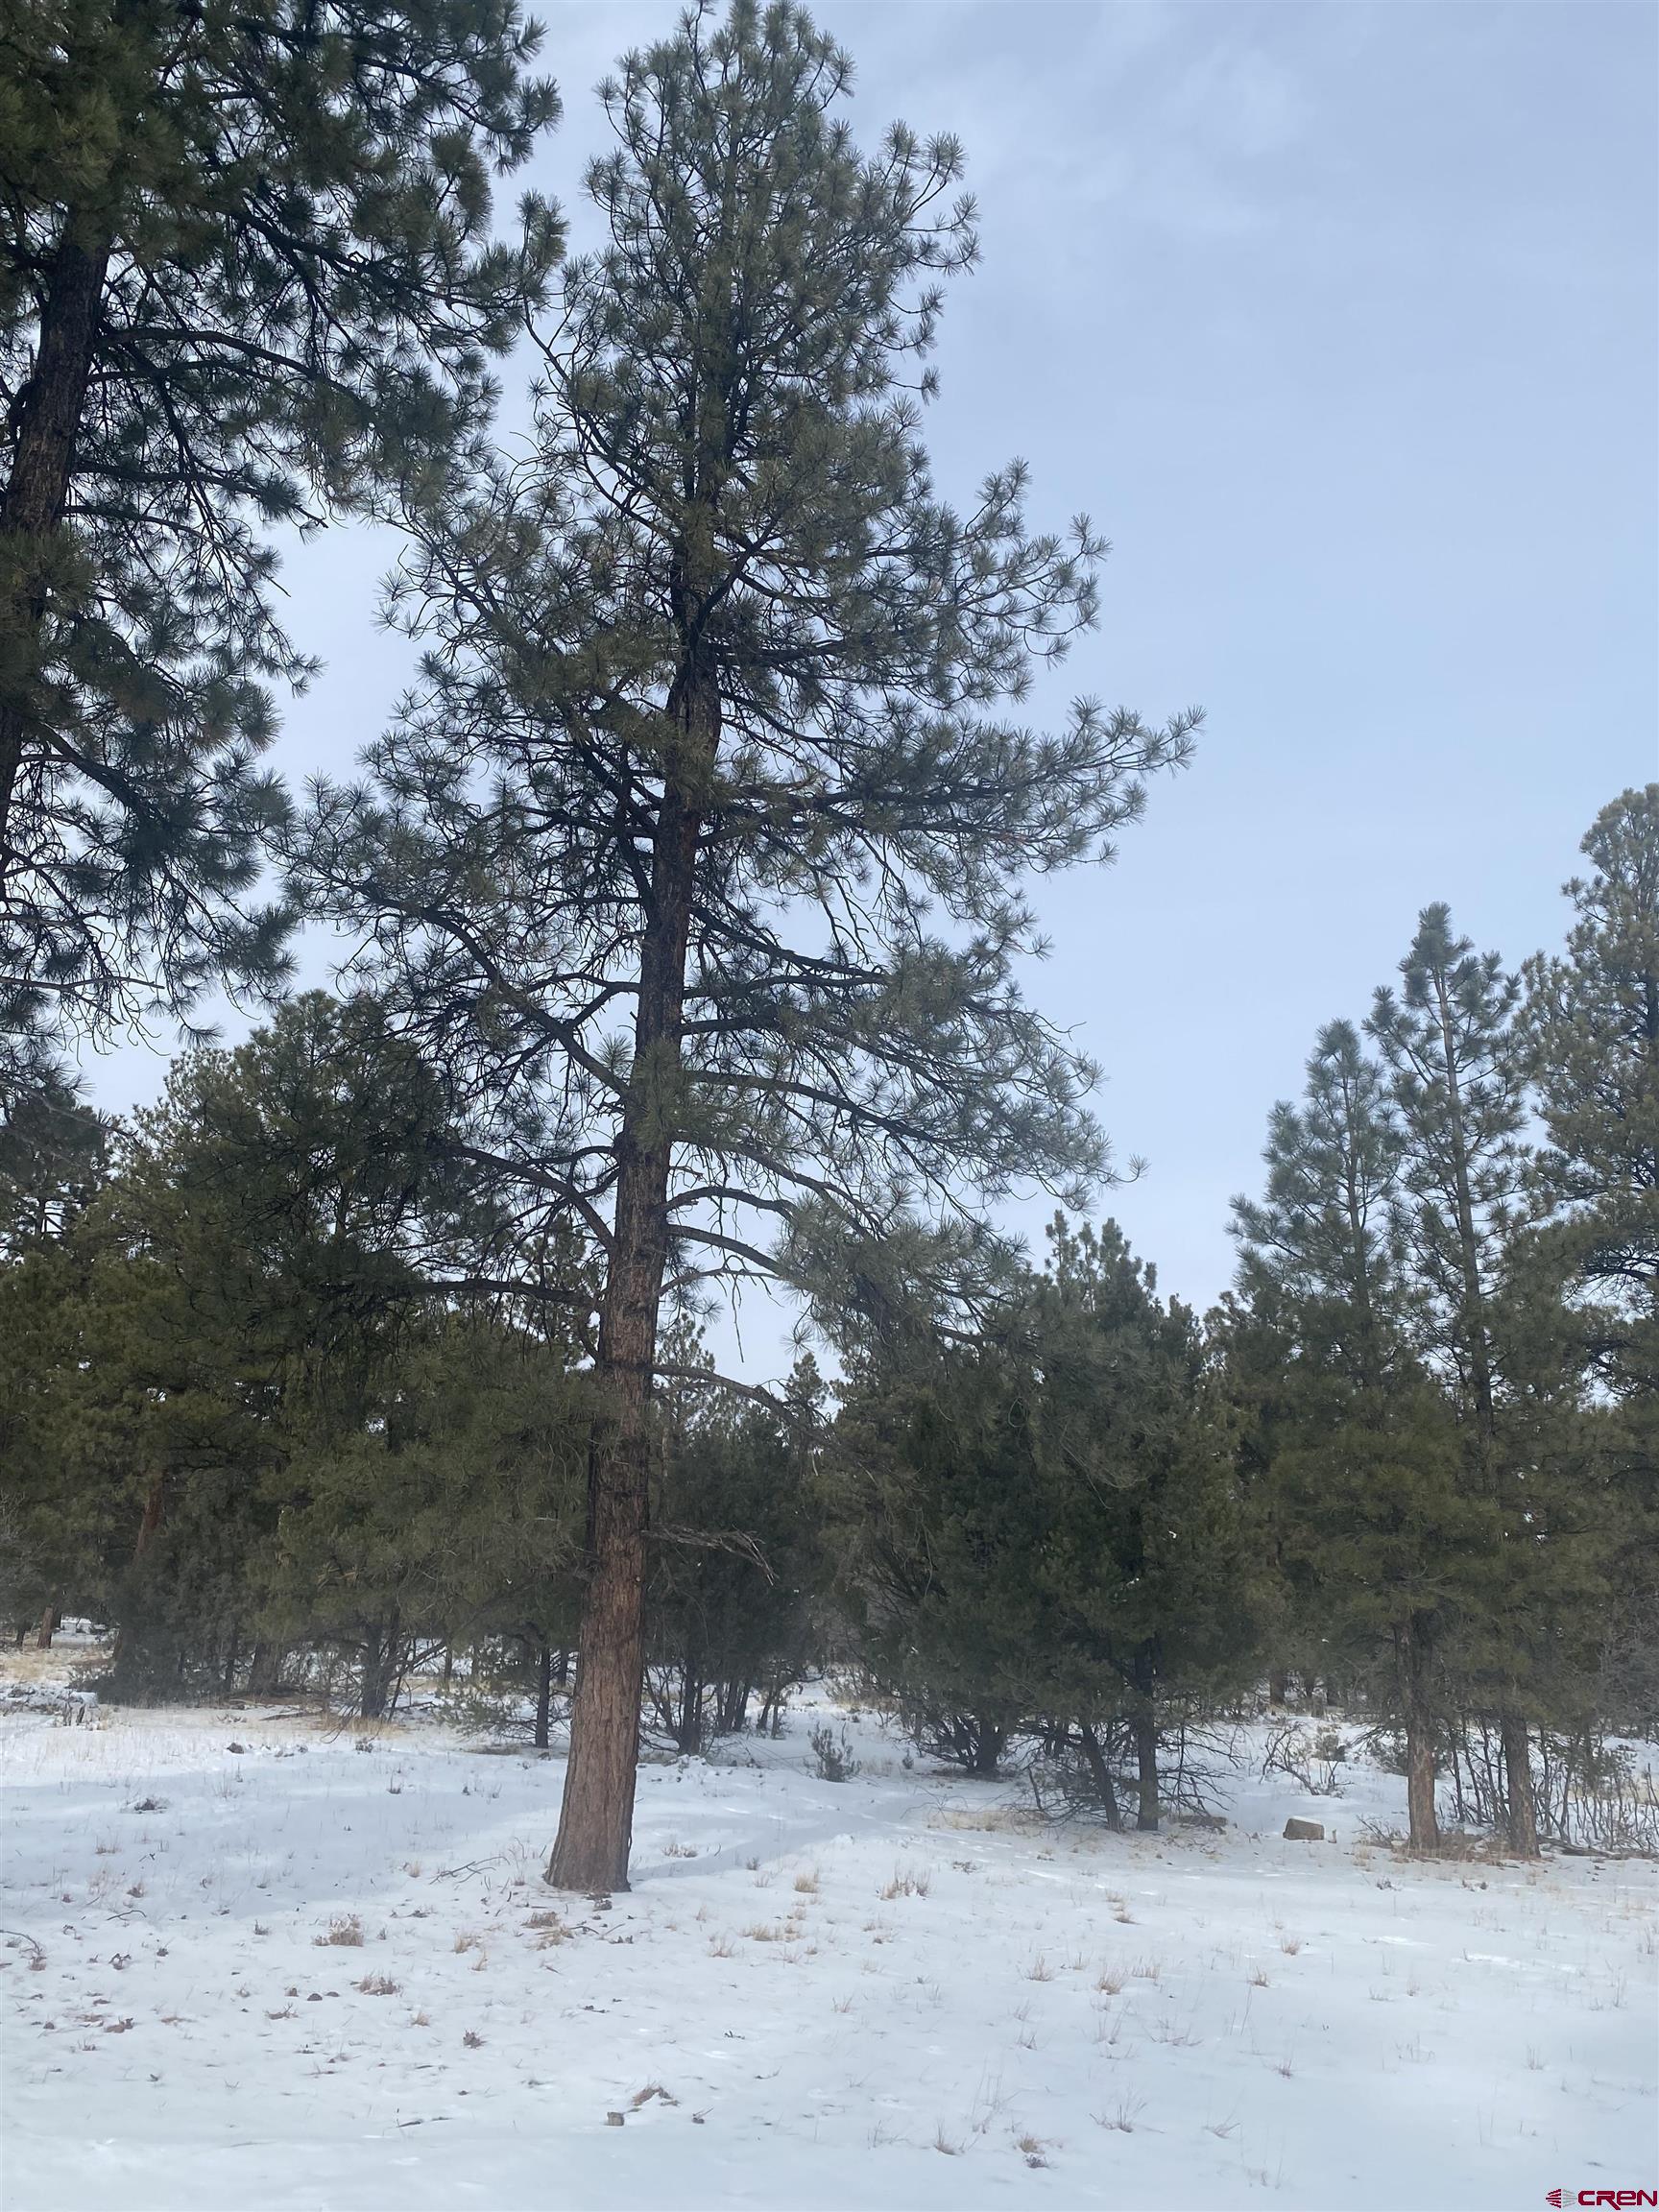 Wonderful lot in Divide Ranch and Club. Lot is on the exterior portion of the subdivision so you don't have to worry about flying golf balls hitting your windows from the fairway but still enjoy the amenities of this great community. And this great location is close to the club house too.  Pretty Ponderosa Pine trees abound and you will love the deer that wander through.  Level lot just waiting for your dream home! Water tap is PAID, and all utilities are at the lot line with paved roads throughout the subdivision. Private and peaceful yet just 10 minutes to the Town of Ridgway, 30 Minutes to Montrose with the recently improved Regional Airport and 45 minutes to world class skiing in Telluride. Come realize your dream of owning property and building a home in Southwestern Colorado!